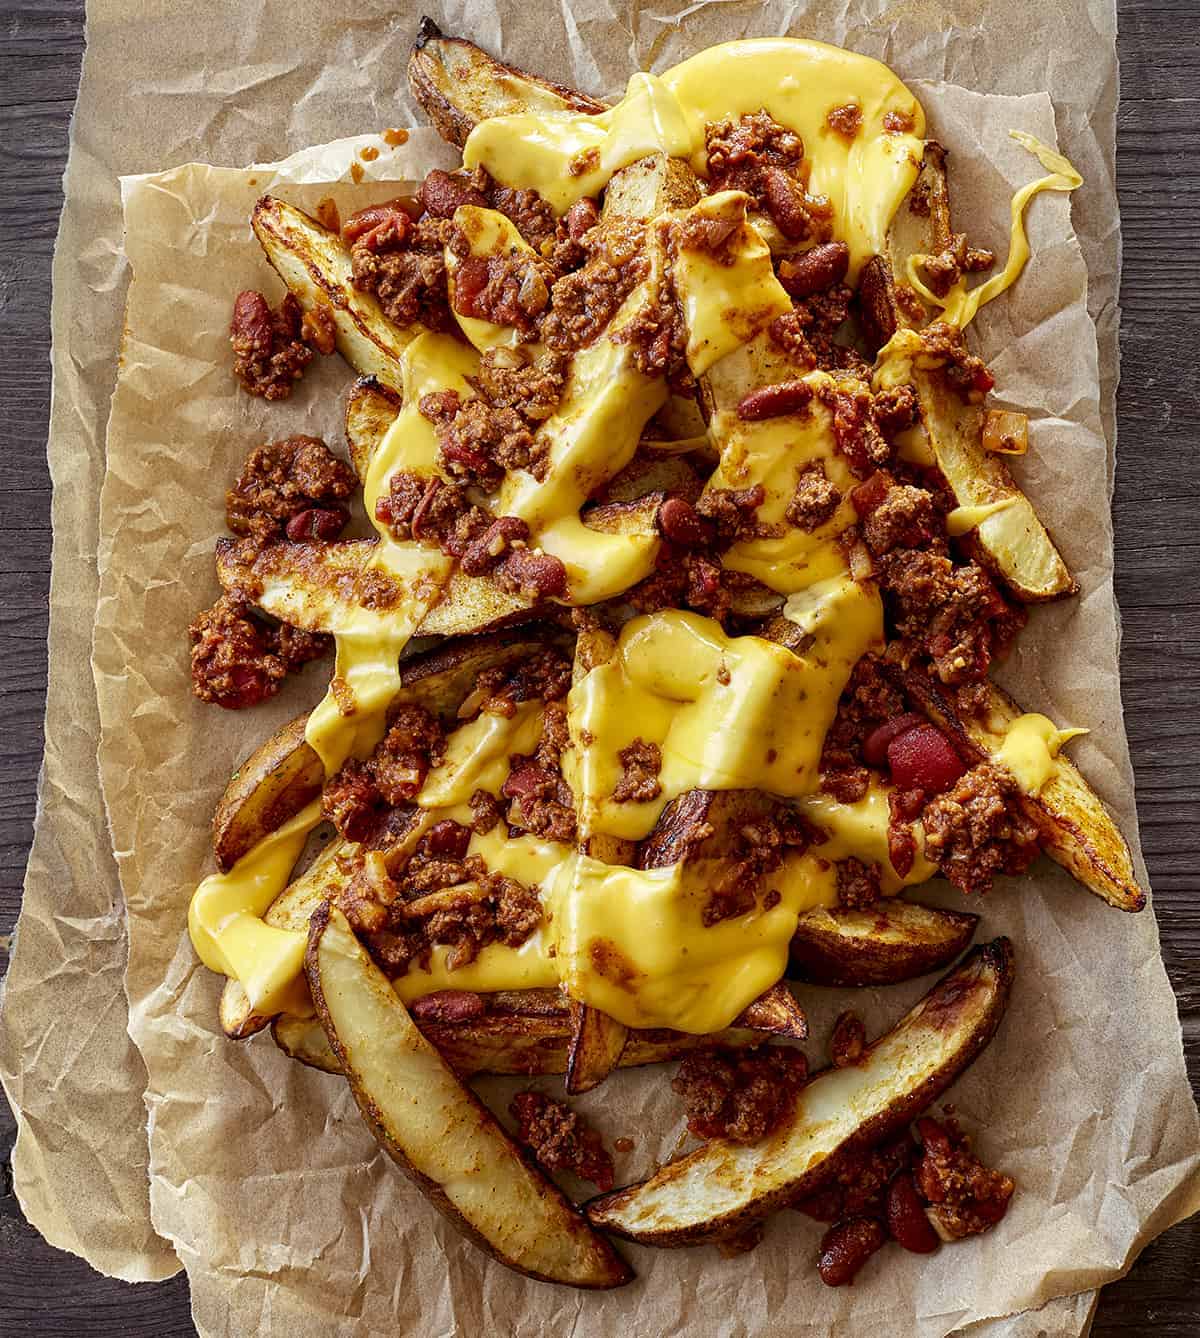 Starting the layers of Chili Cheese Fries